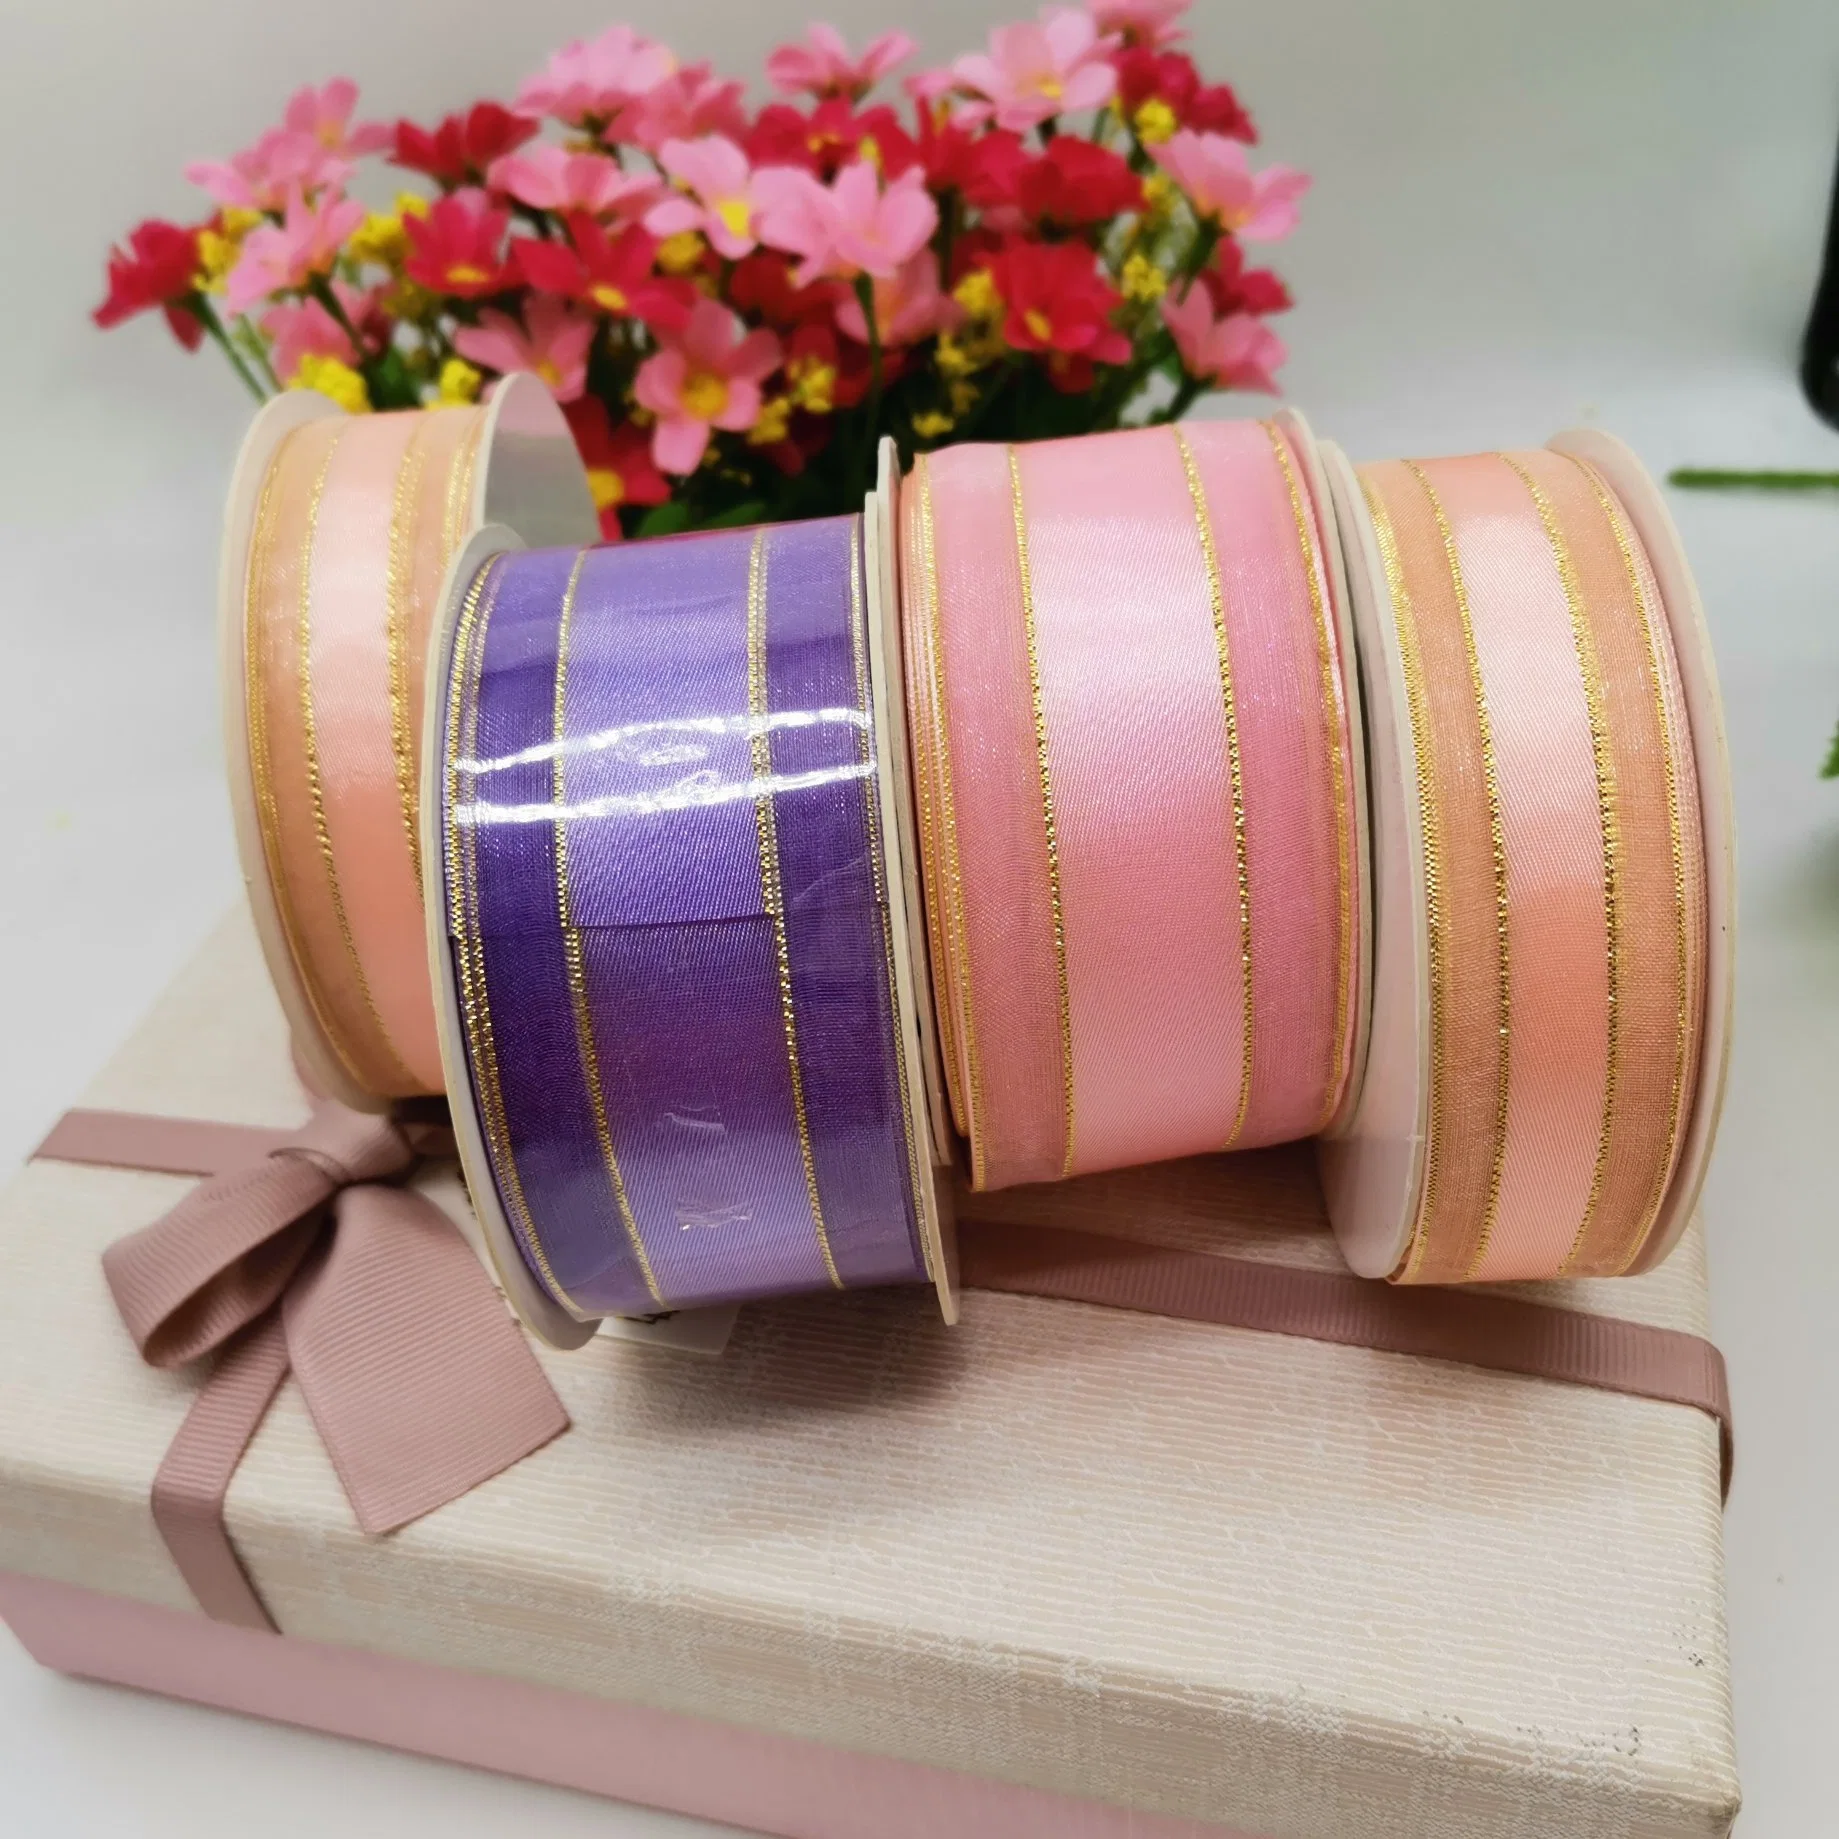 Satin Center Organza Ribbon with Gold/Silver Lines for Christmas/Wrapping/Gift Box Packing/Bows